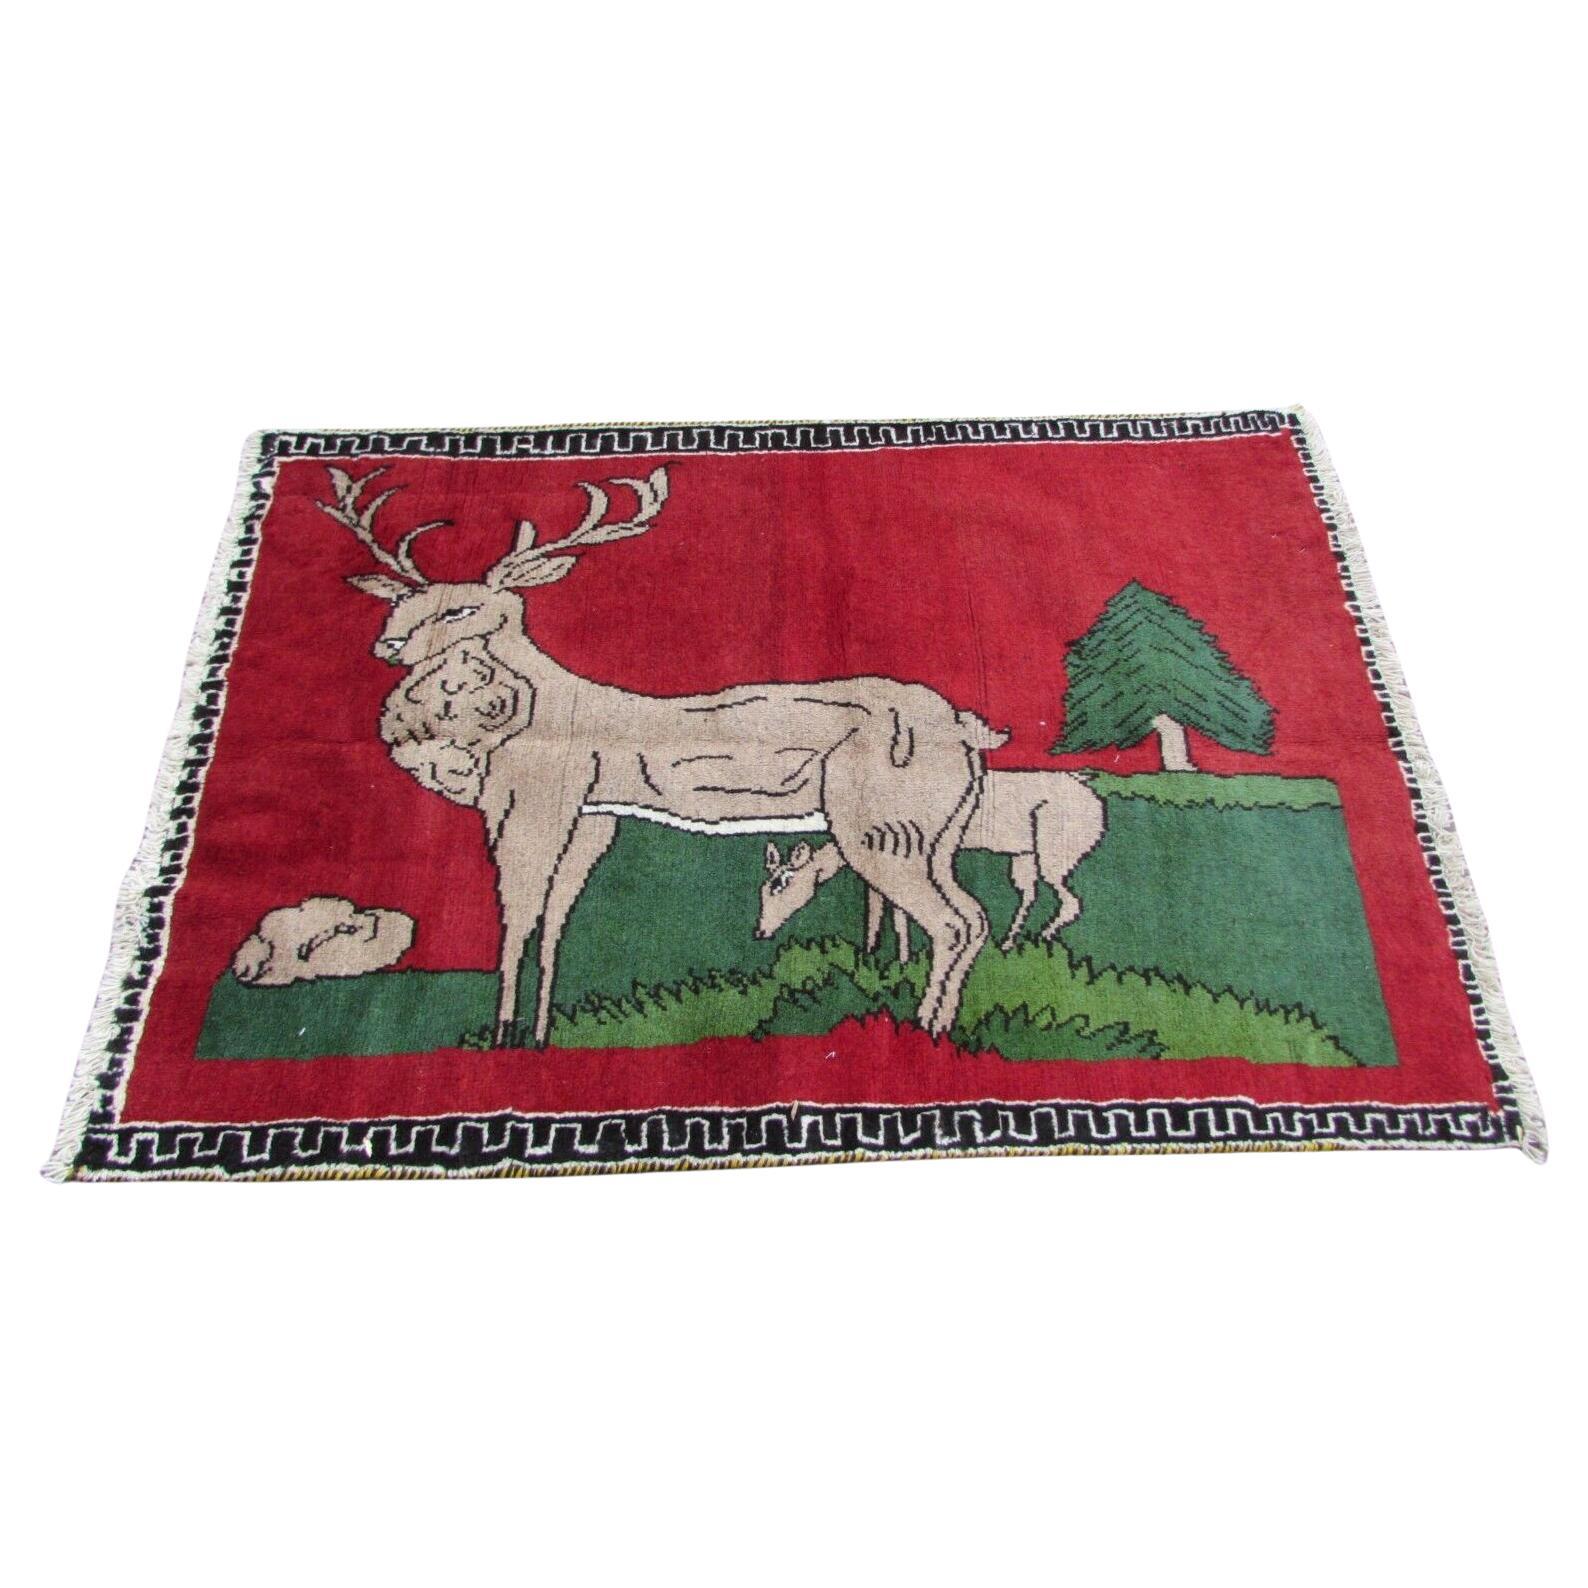 Handmade Vintage Persian Style Gabbeh Rug With Deer 2.6' x 4', 1970s - 1Q71